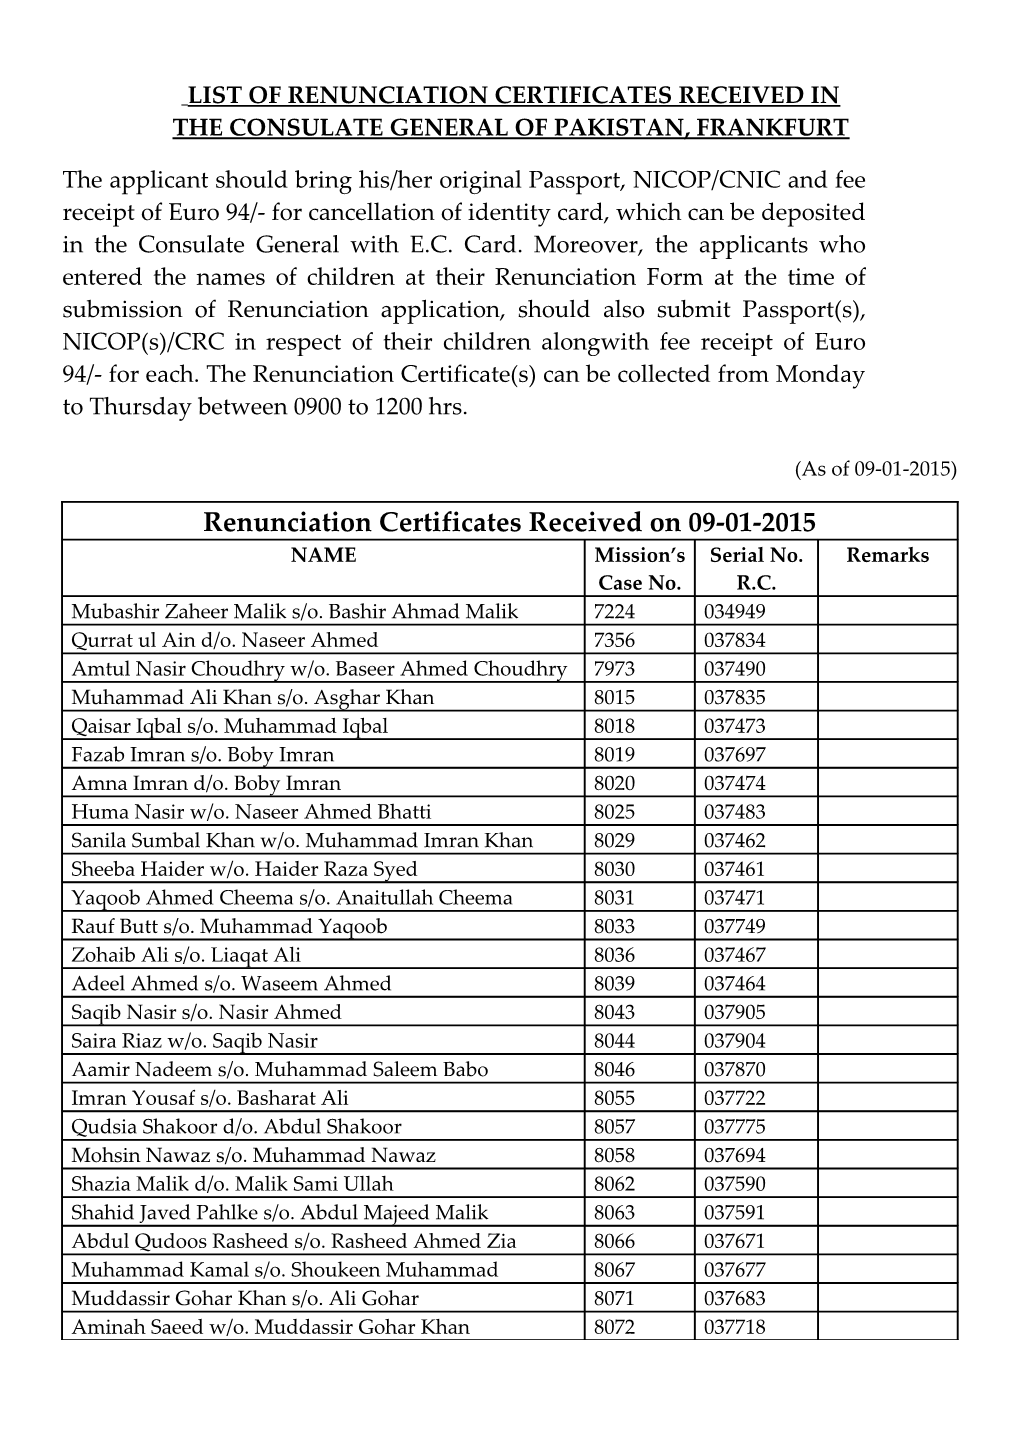 List of Renunciation Certificates Received in the Consulate General of Pakistan, Frankfurt